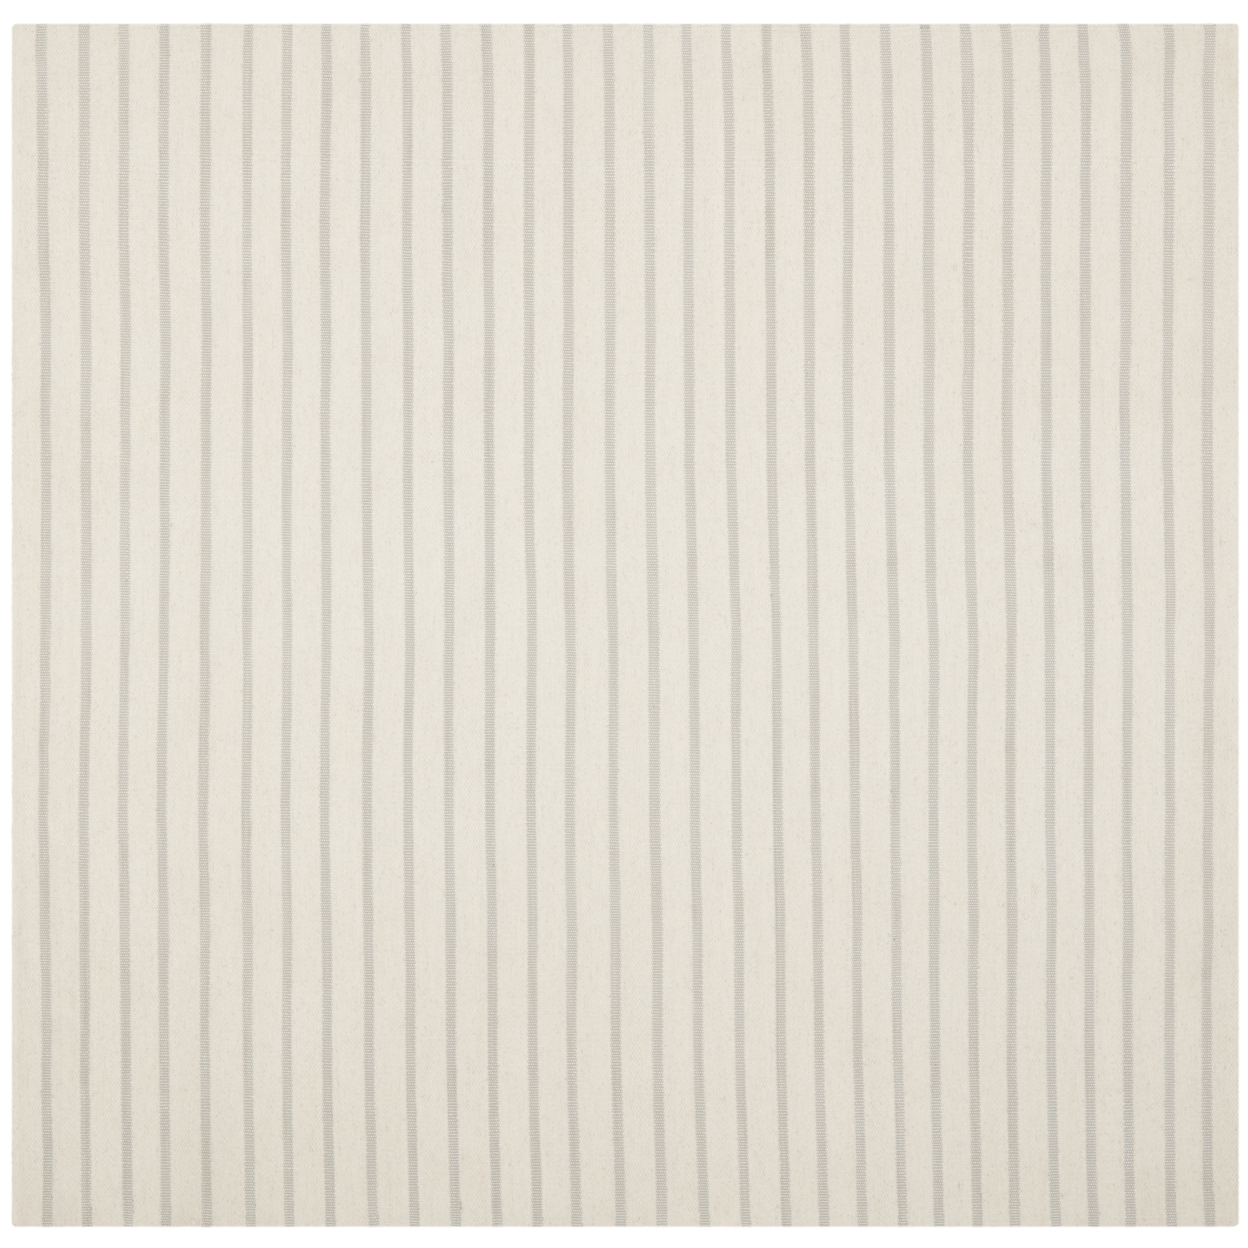 SAFAVIEH Dhurries Collection DHU313D Handwoven White Rug - 6' Square